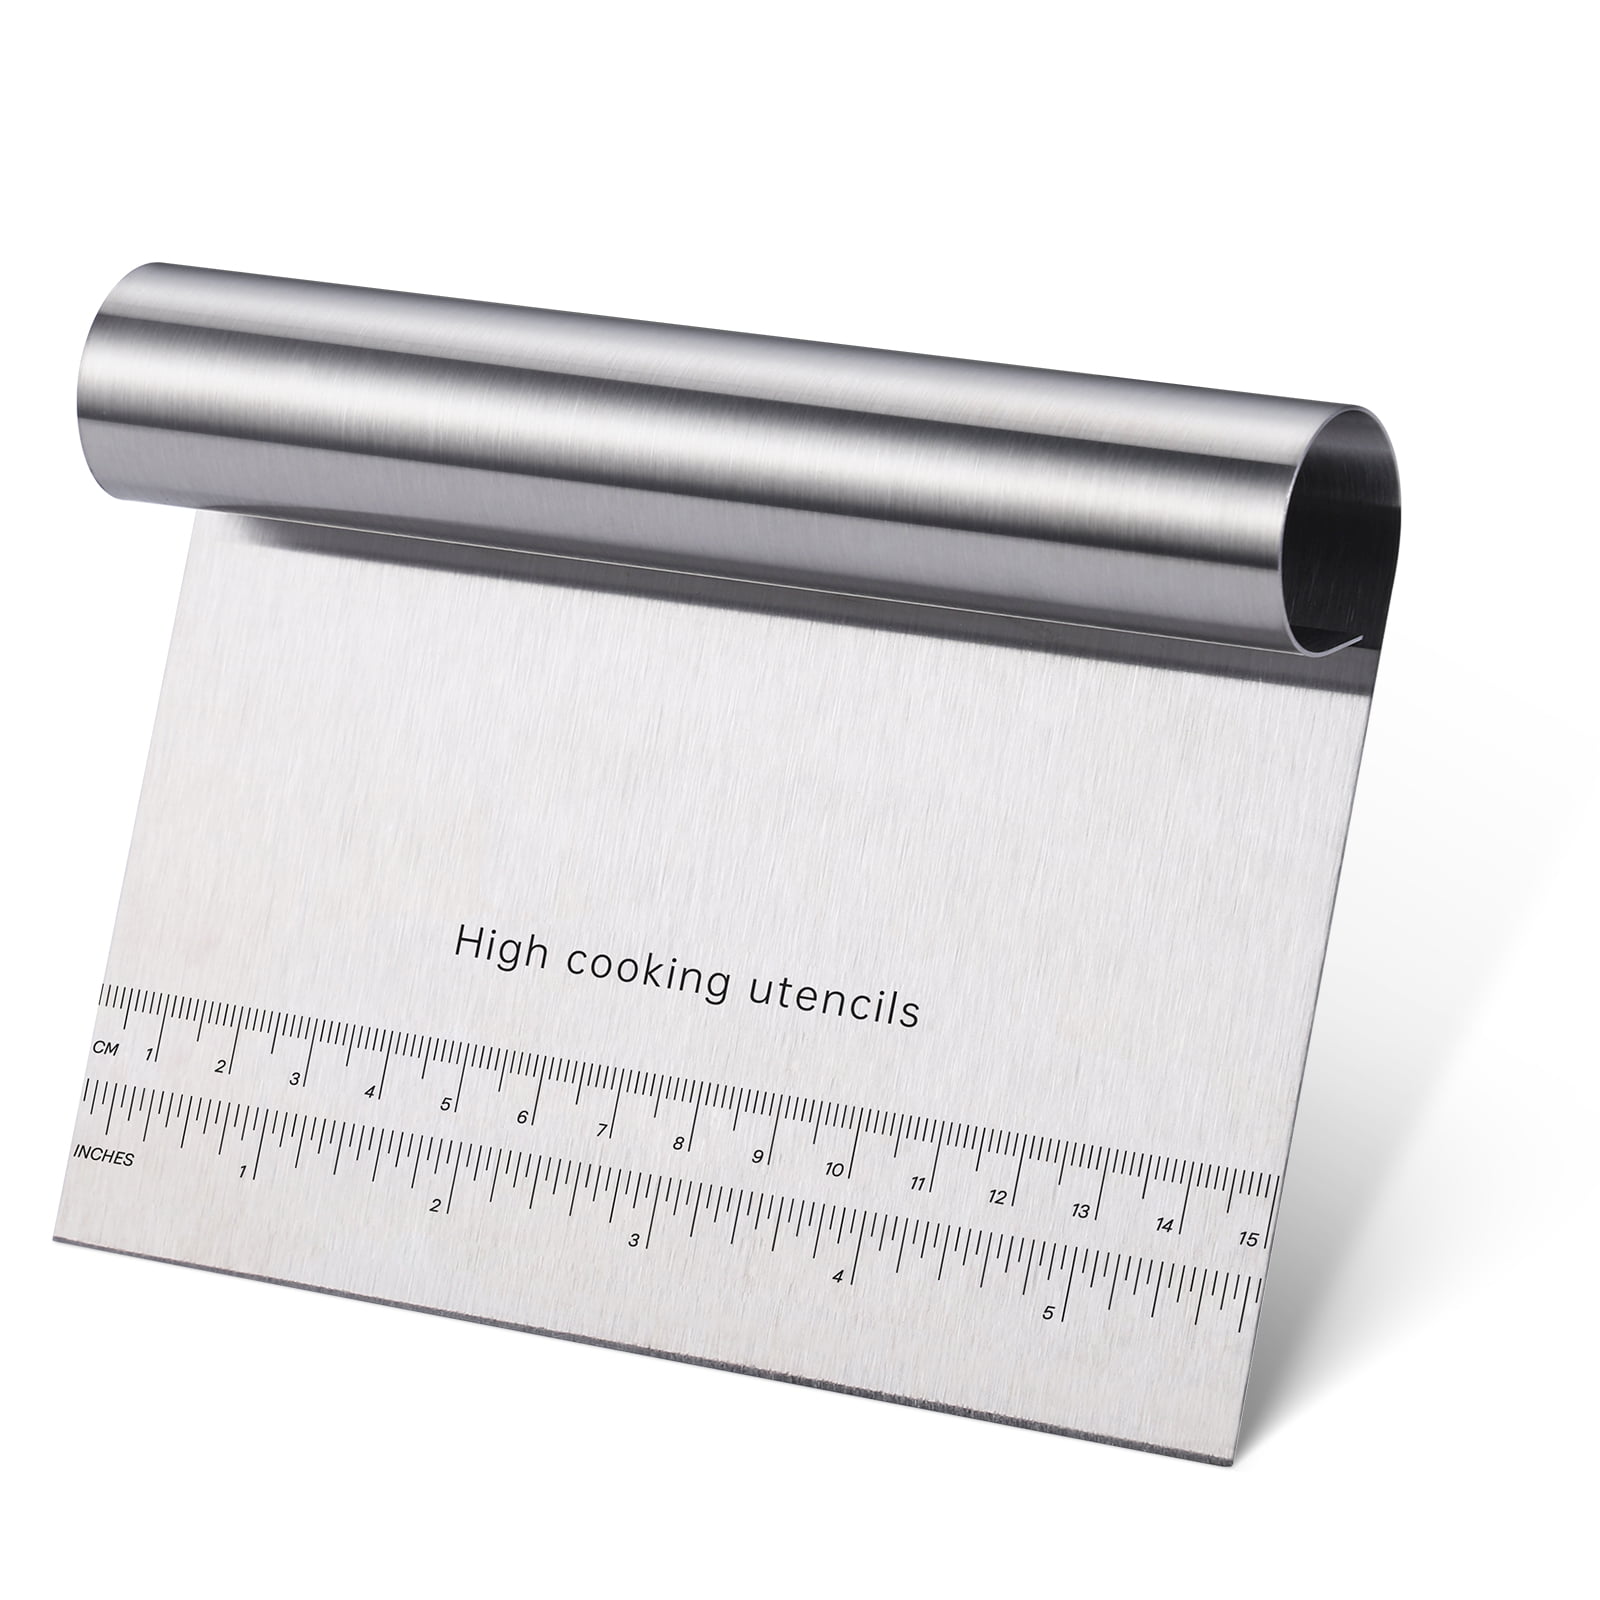 Stainless-Steel Vegetable Chopper/Scrapers Bench Measure Guide 6" x 4.75" F/S 